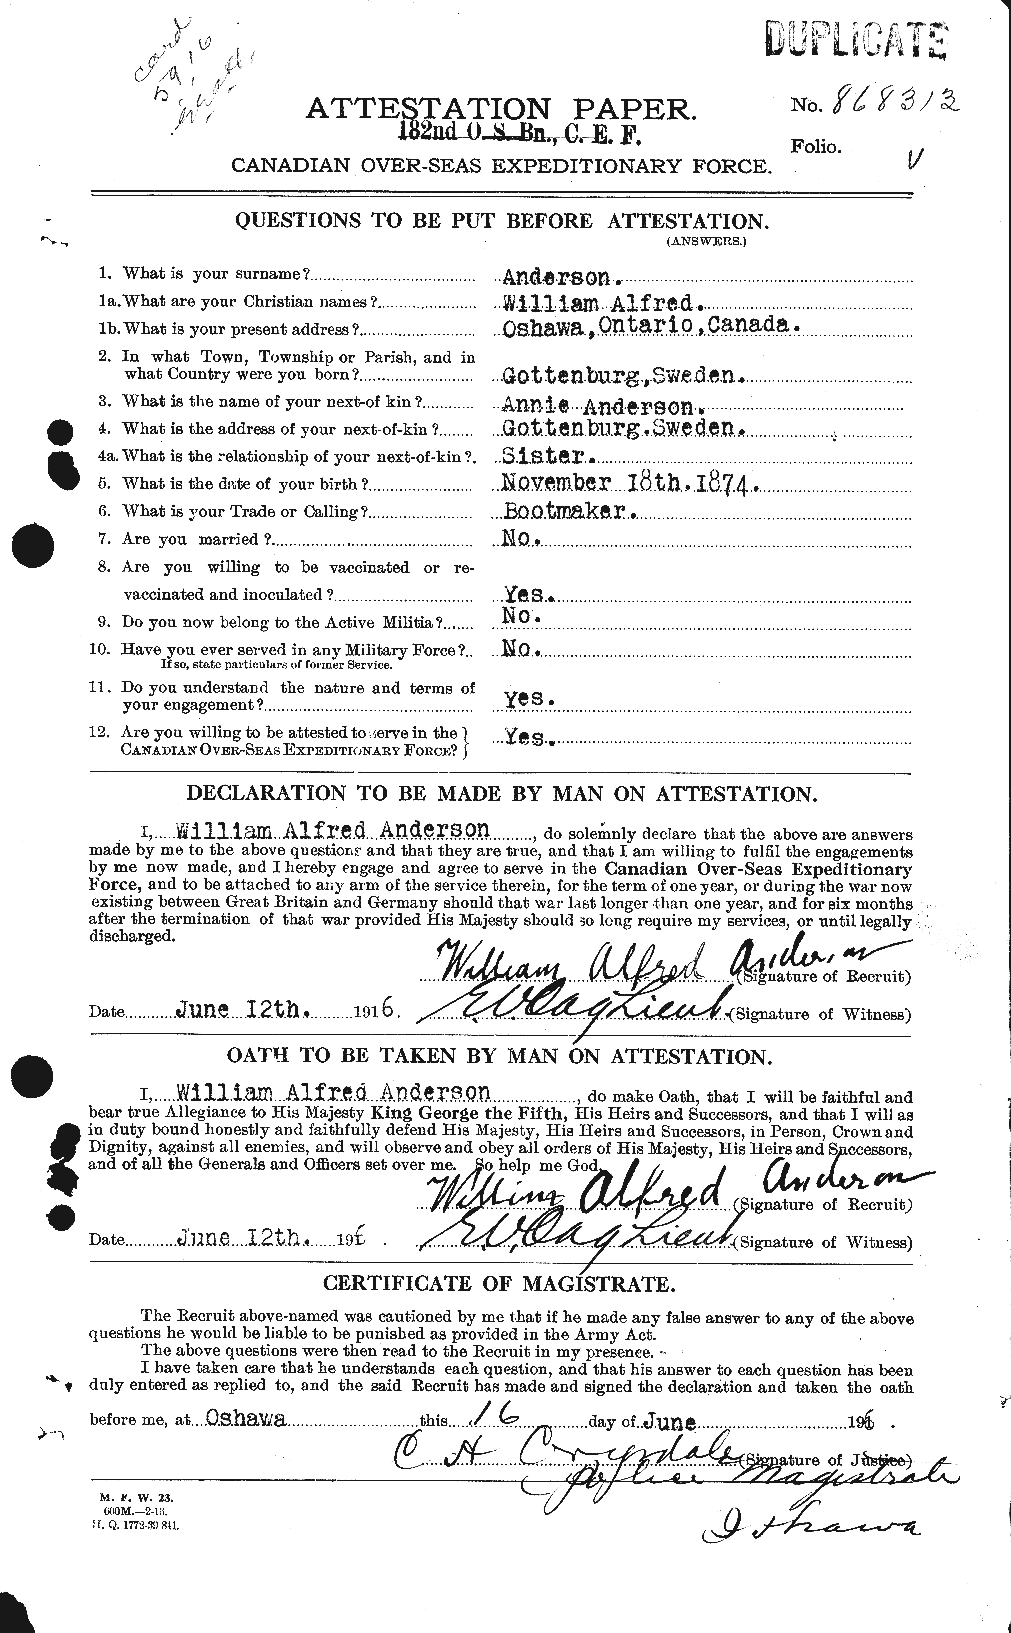 Personnel Records of the First World War - CEF 210775a